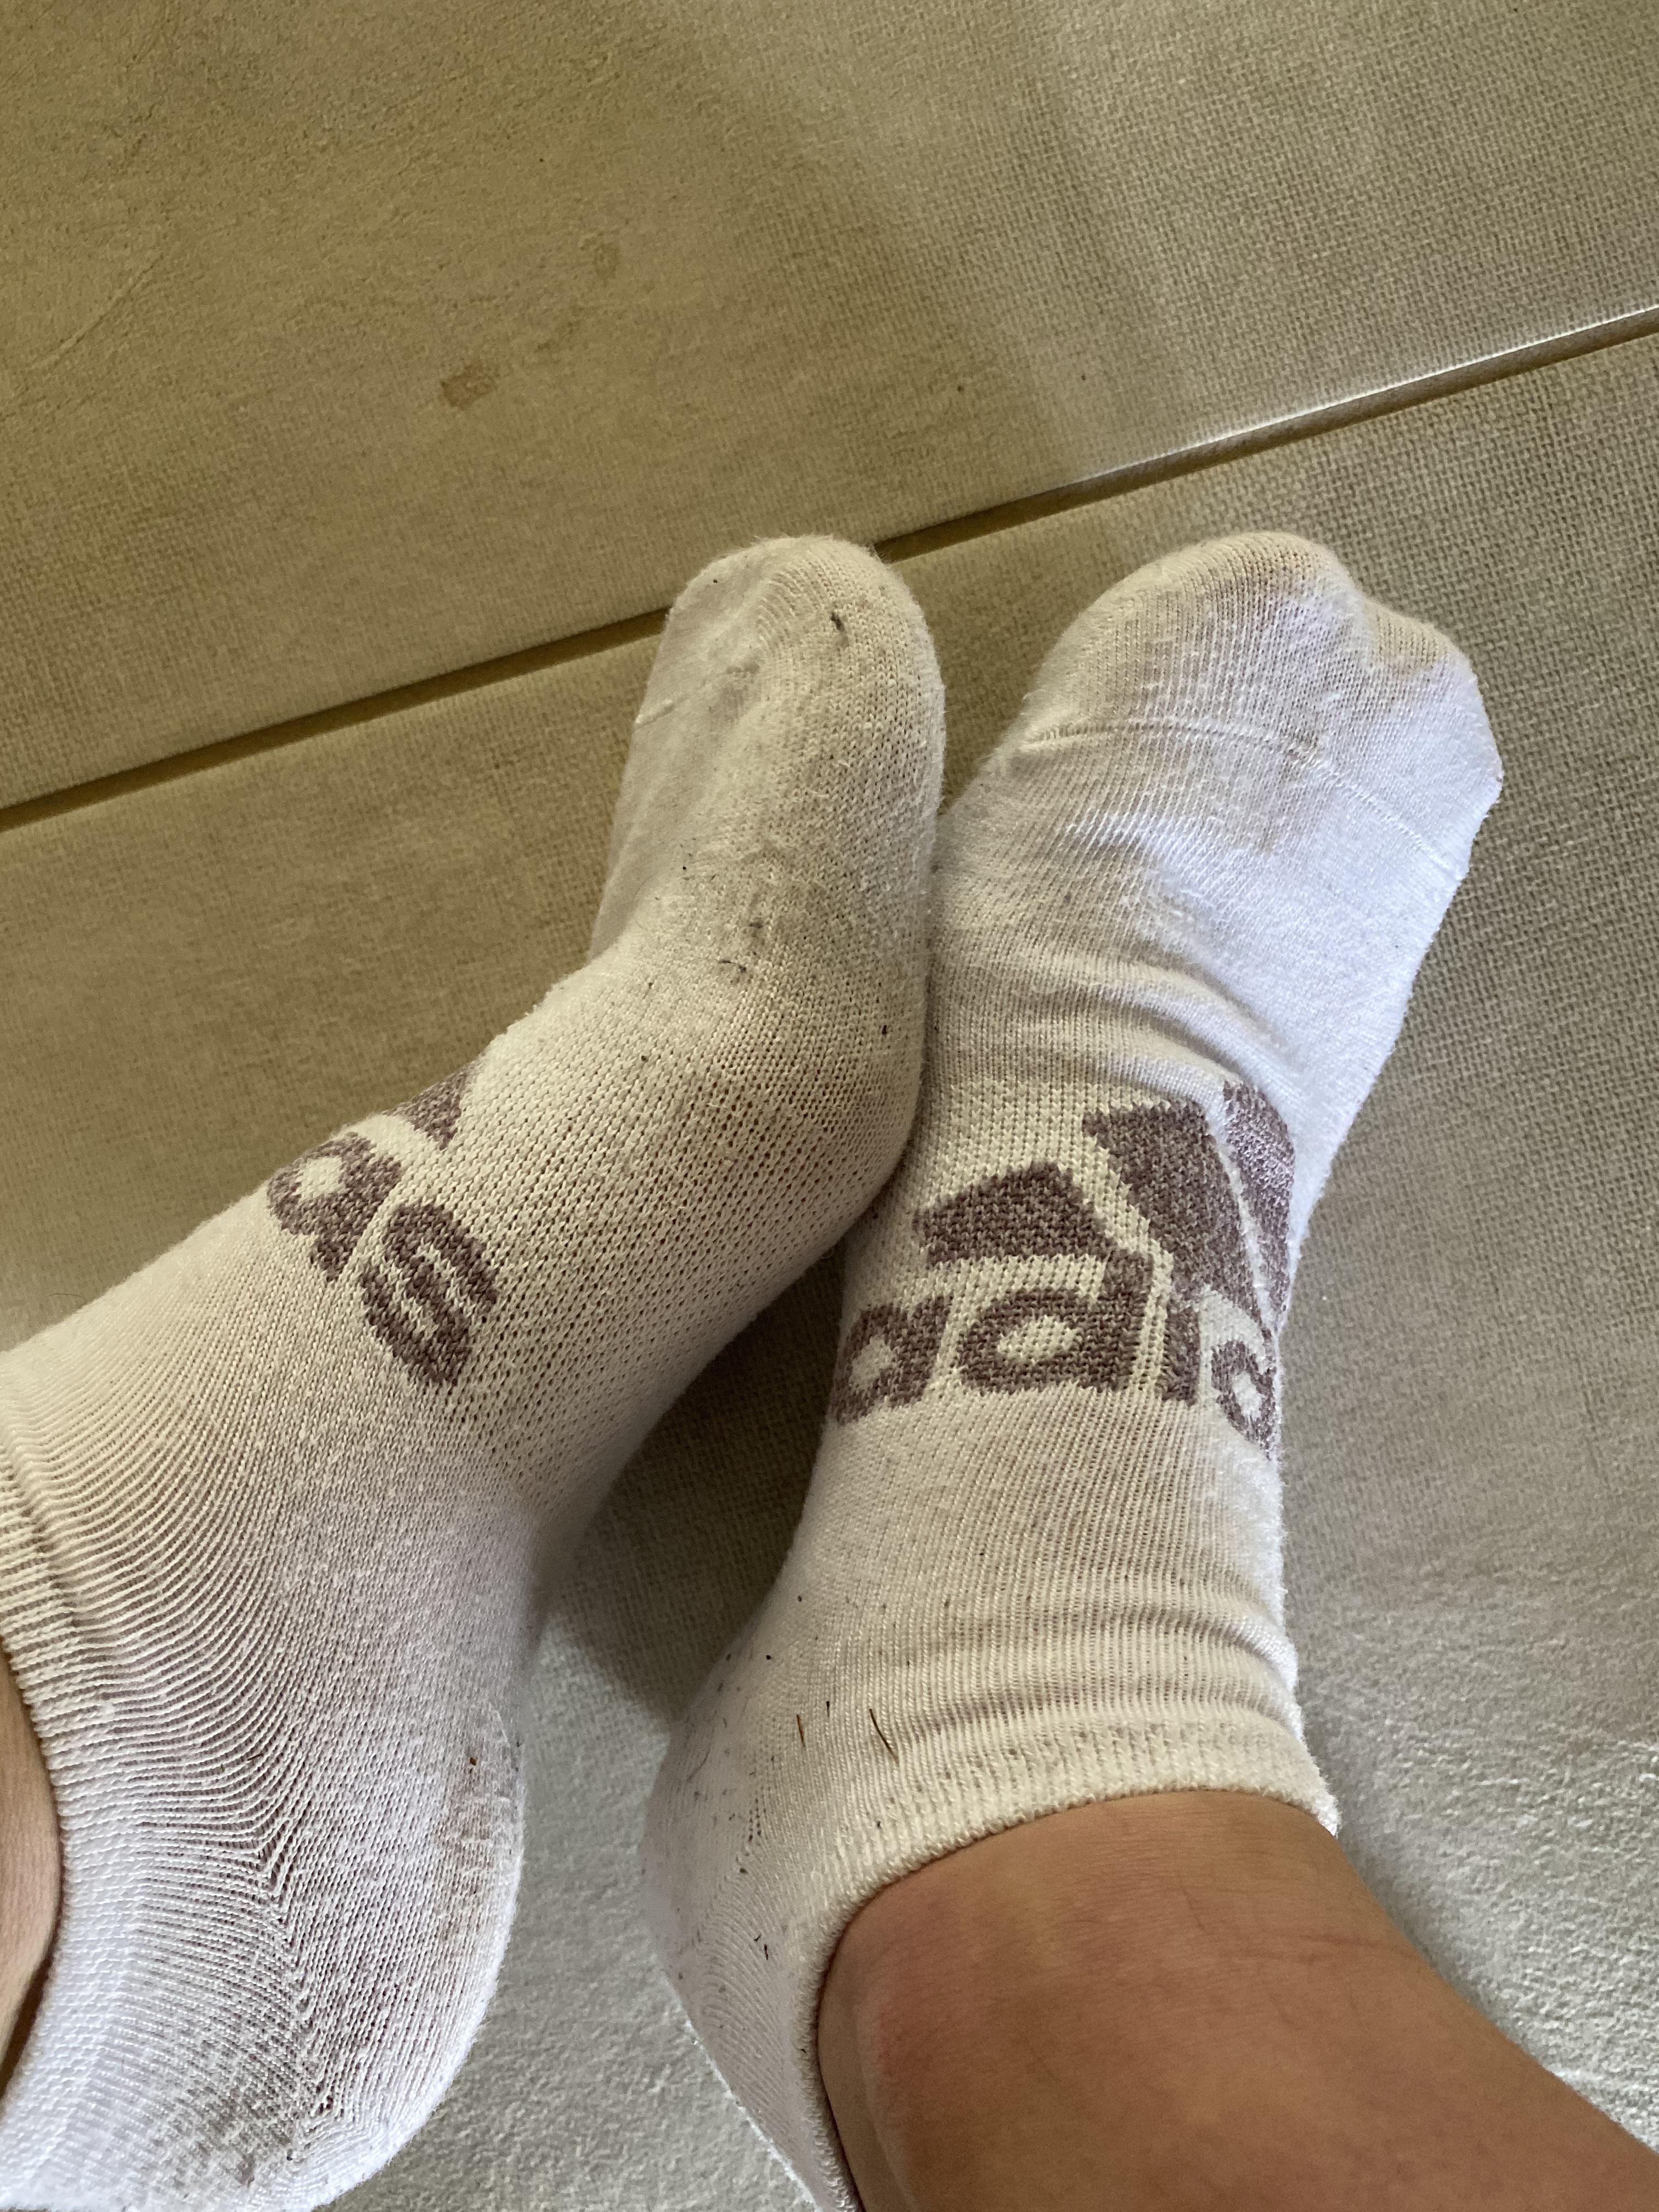 Just ran miles in these adidas socks. They’re soaked with my sweat ...